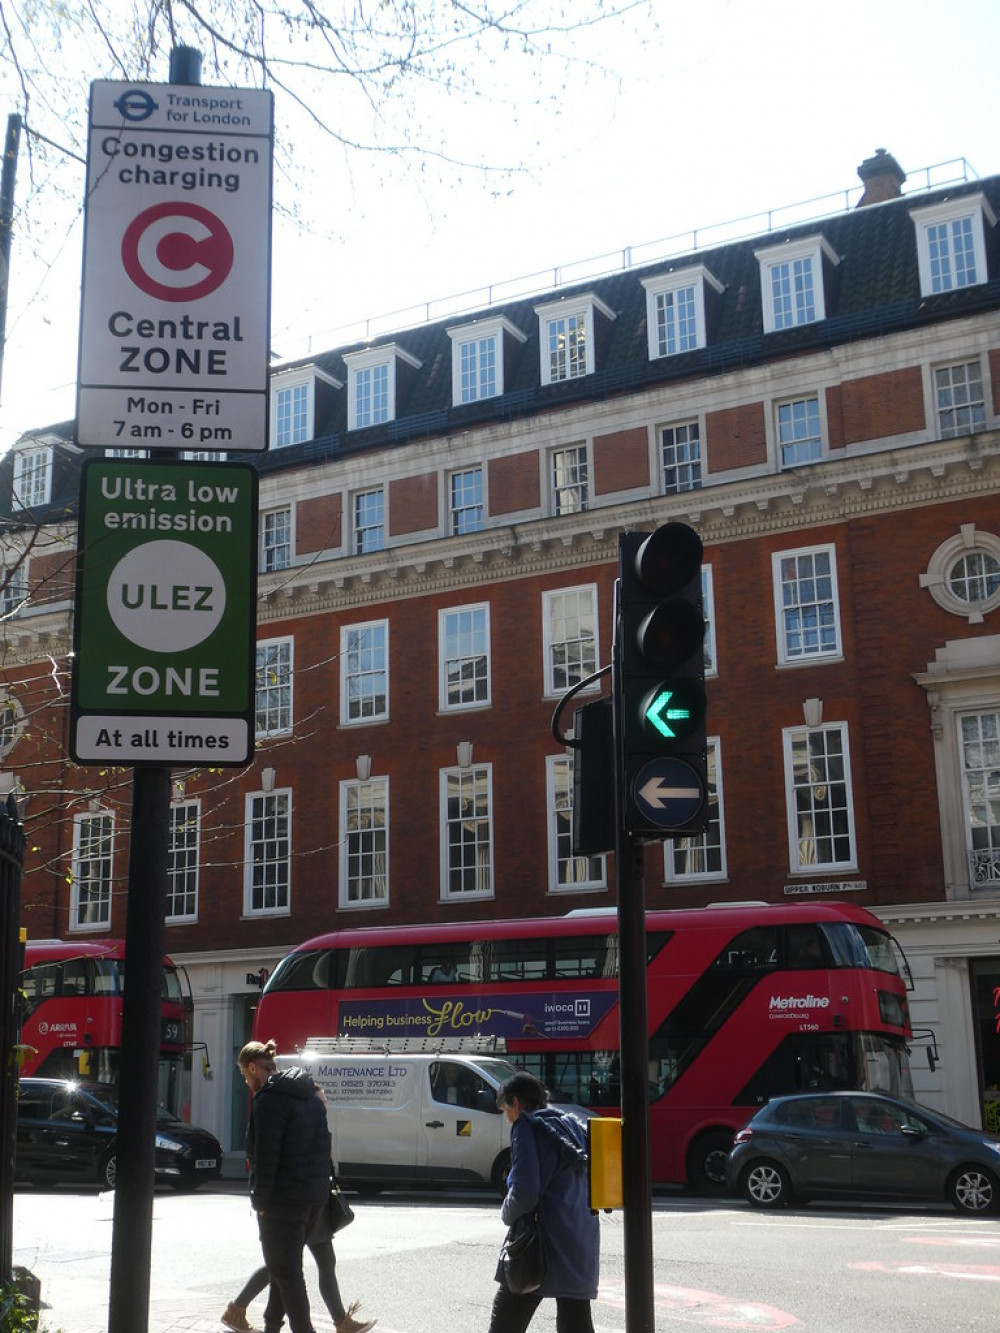 A City Hall study has found a 46% reduction in air pollution in central London. Photo: citytransportinfo.